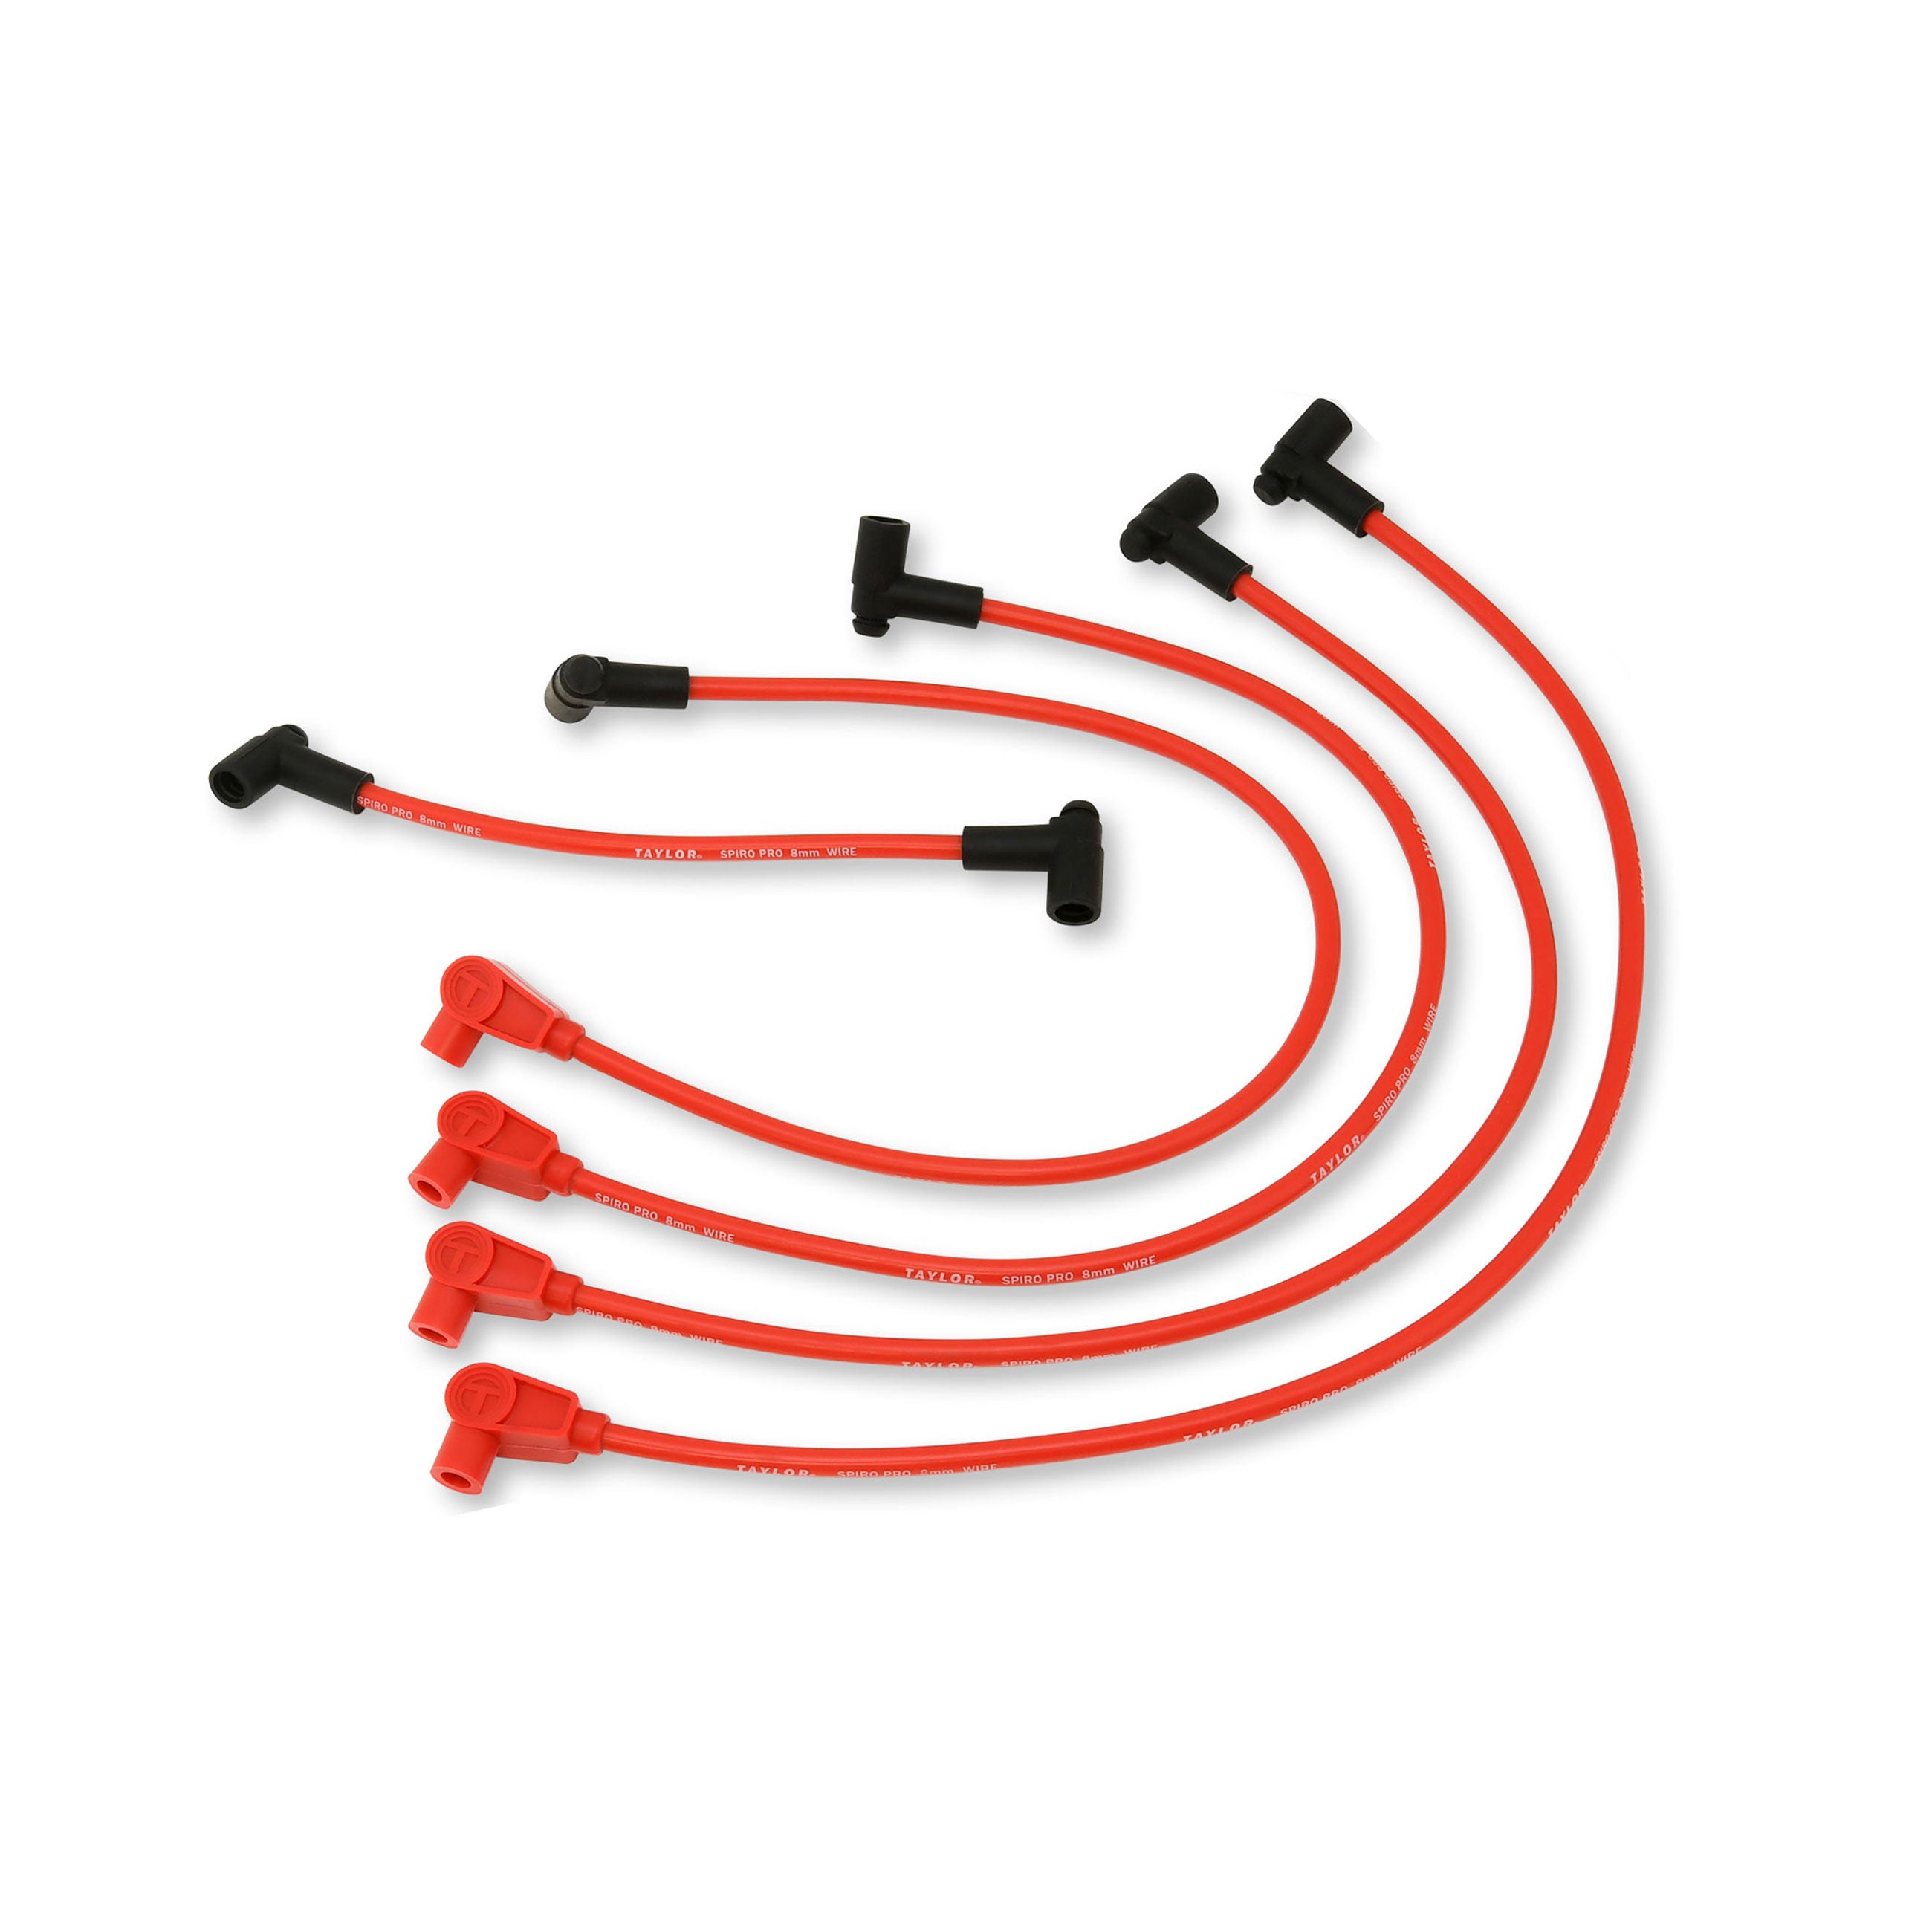 Taylor Cable 74291 8mm Spiro-Pro Custom Spark Plug Wires 4 cyl red 